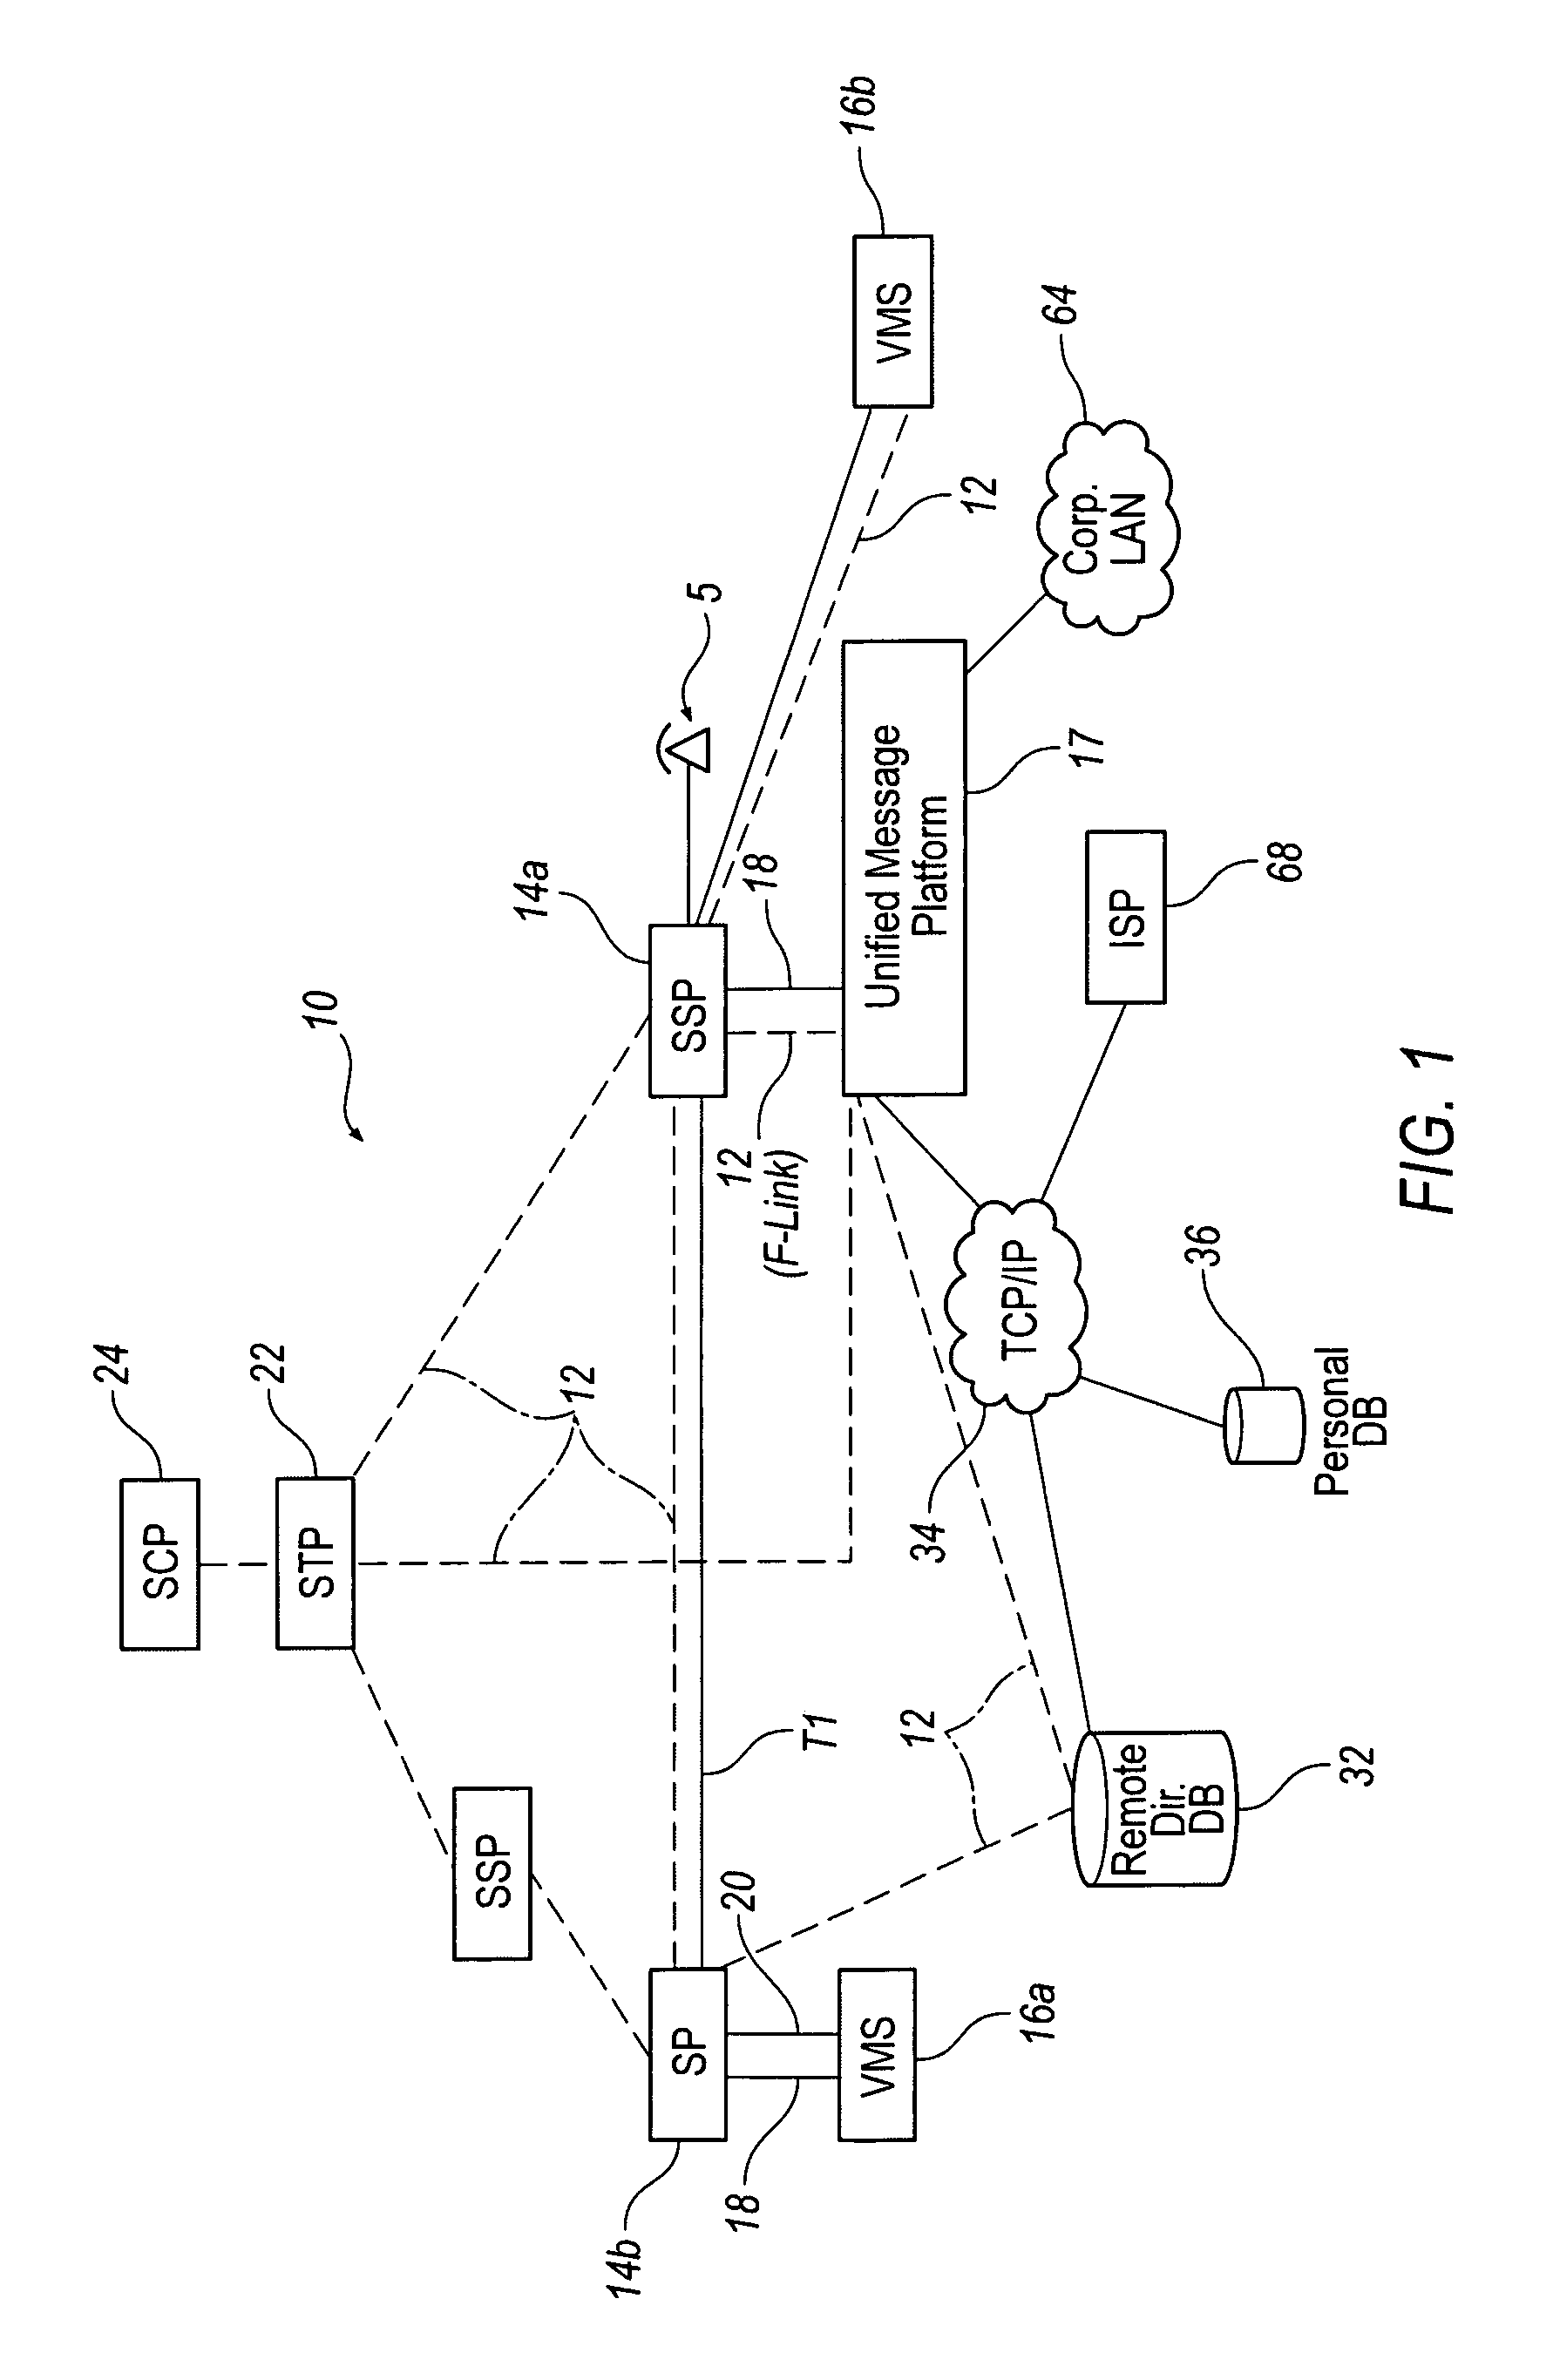 System for obtaining forwarding information for electronic system using speech recognition